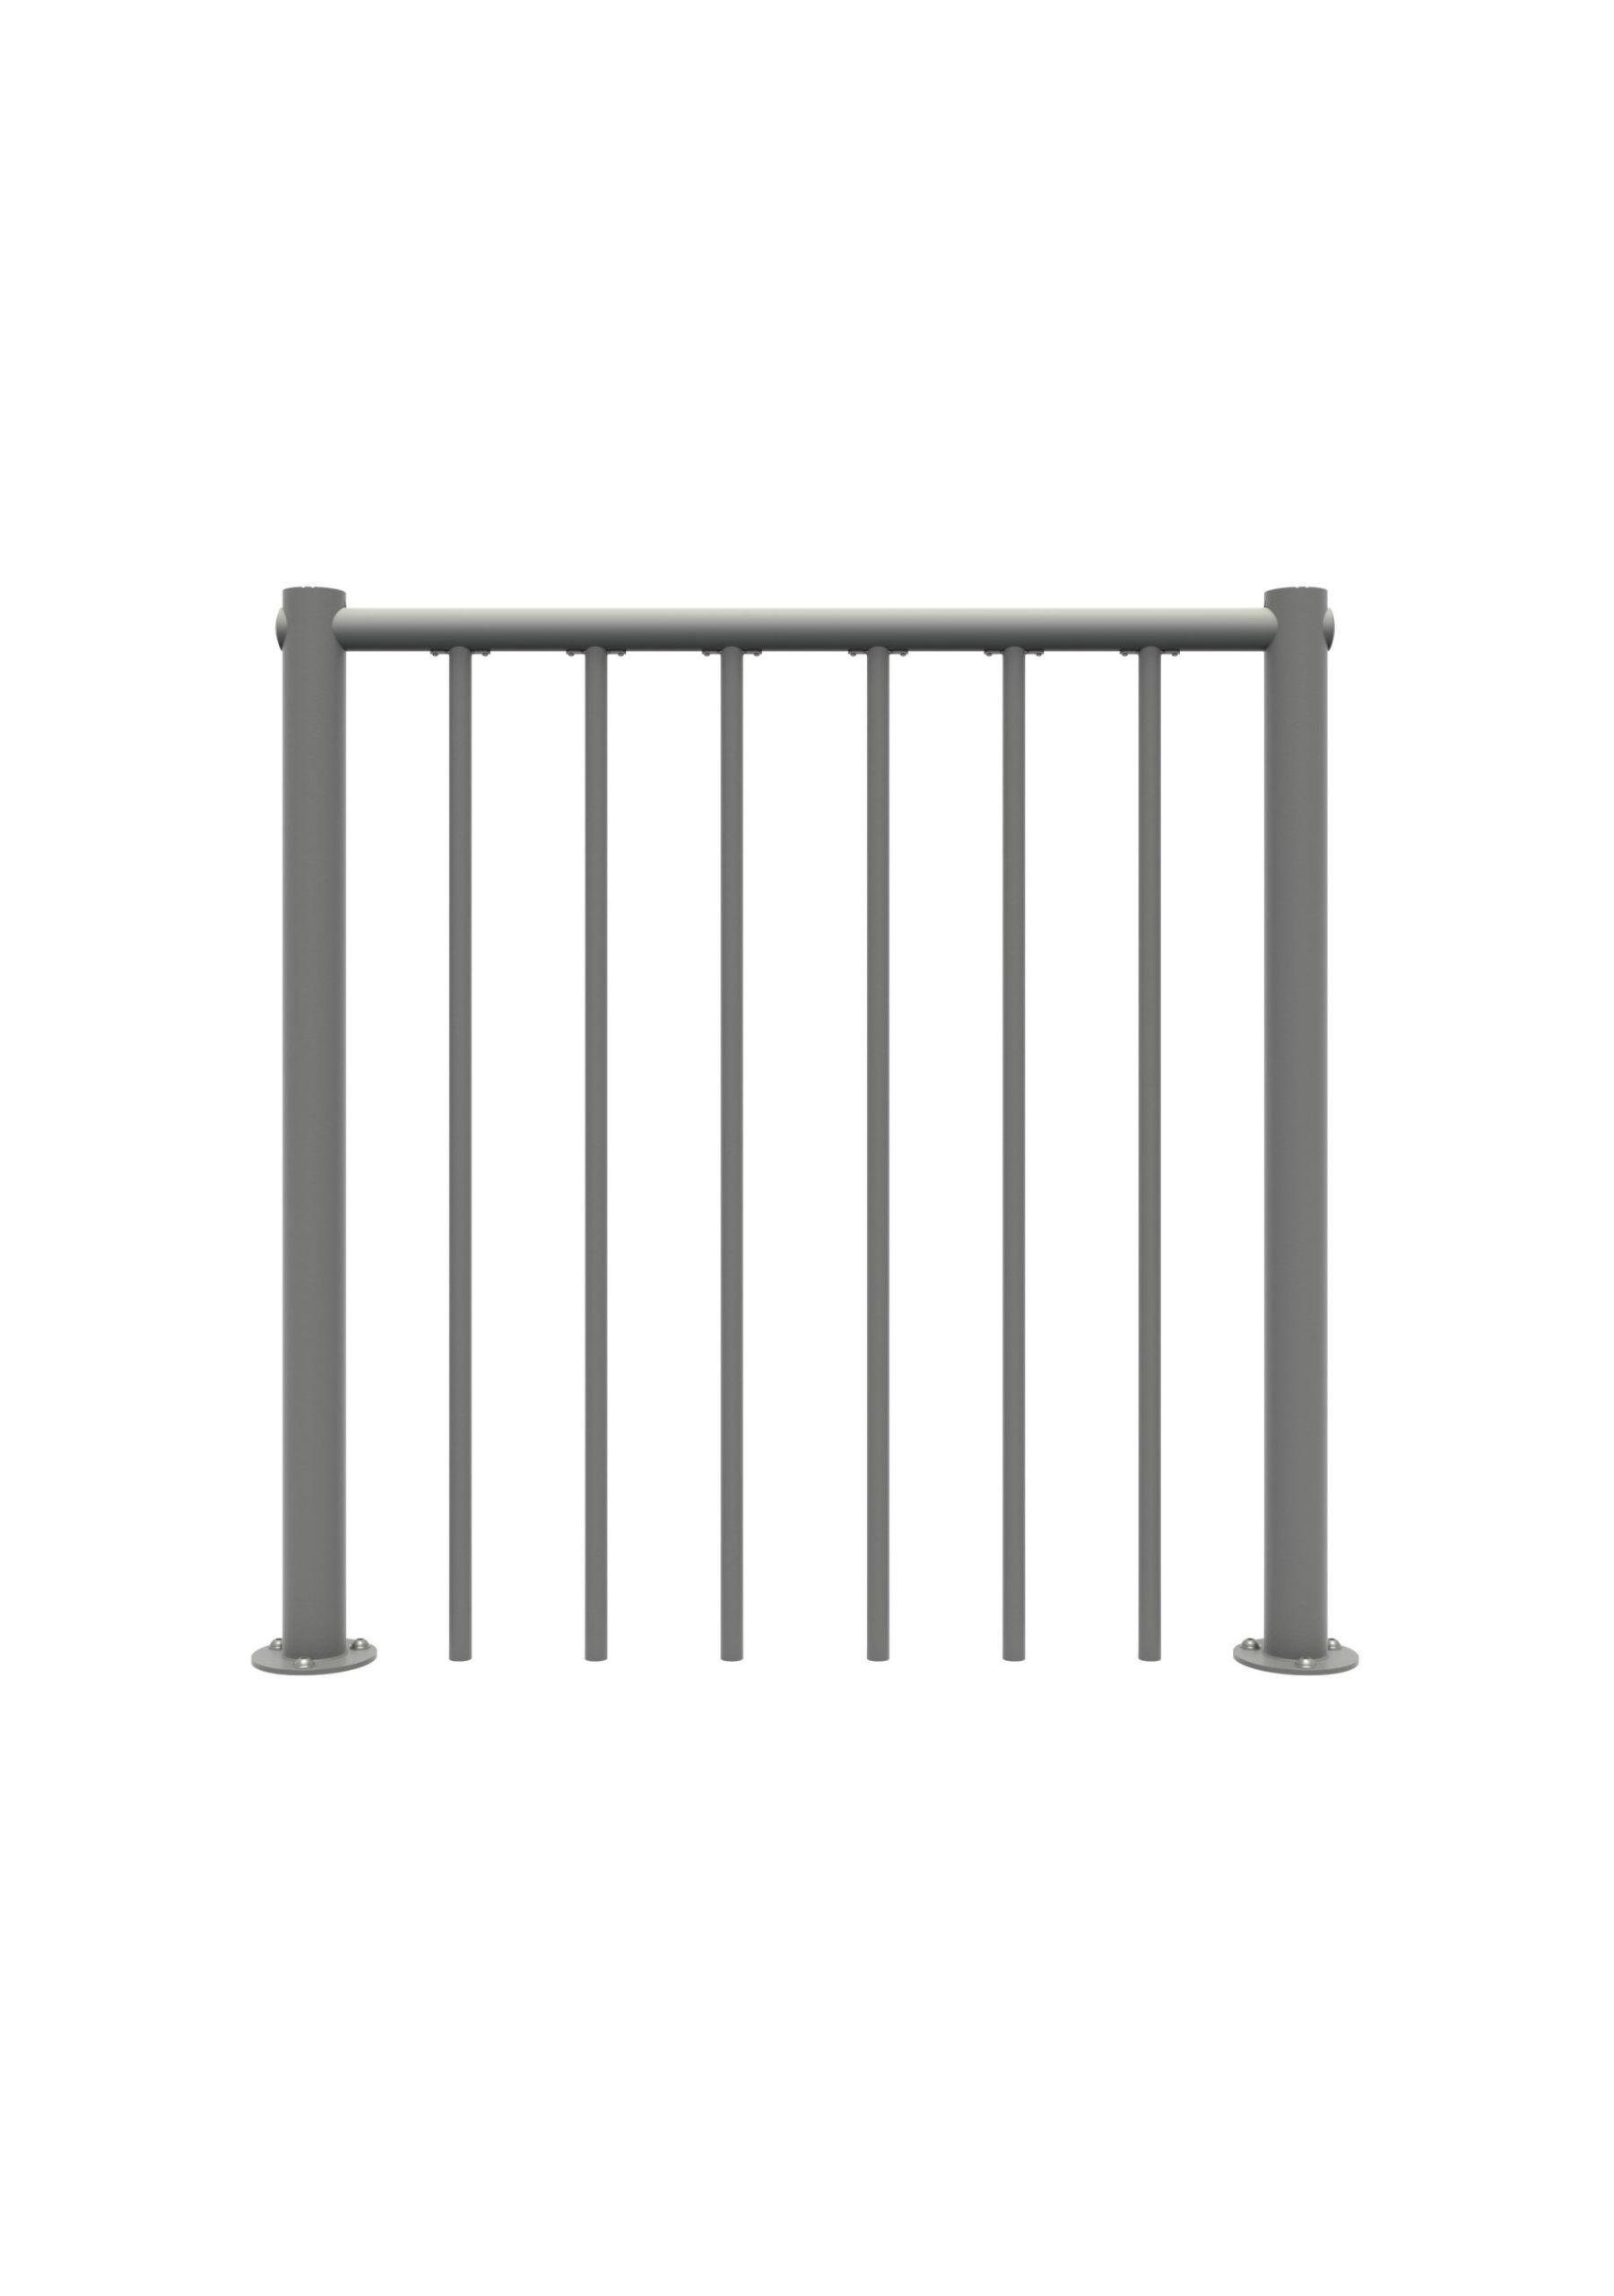 Balustrade with bars and pvc-handrail grey